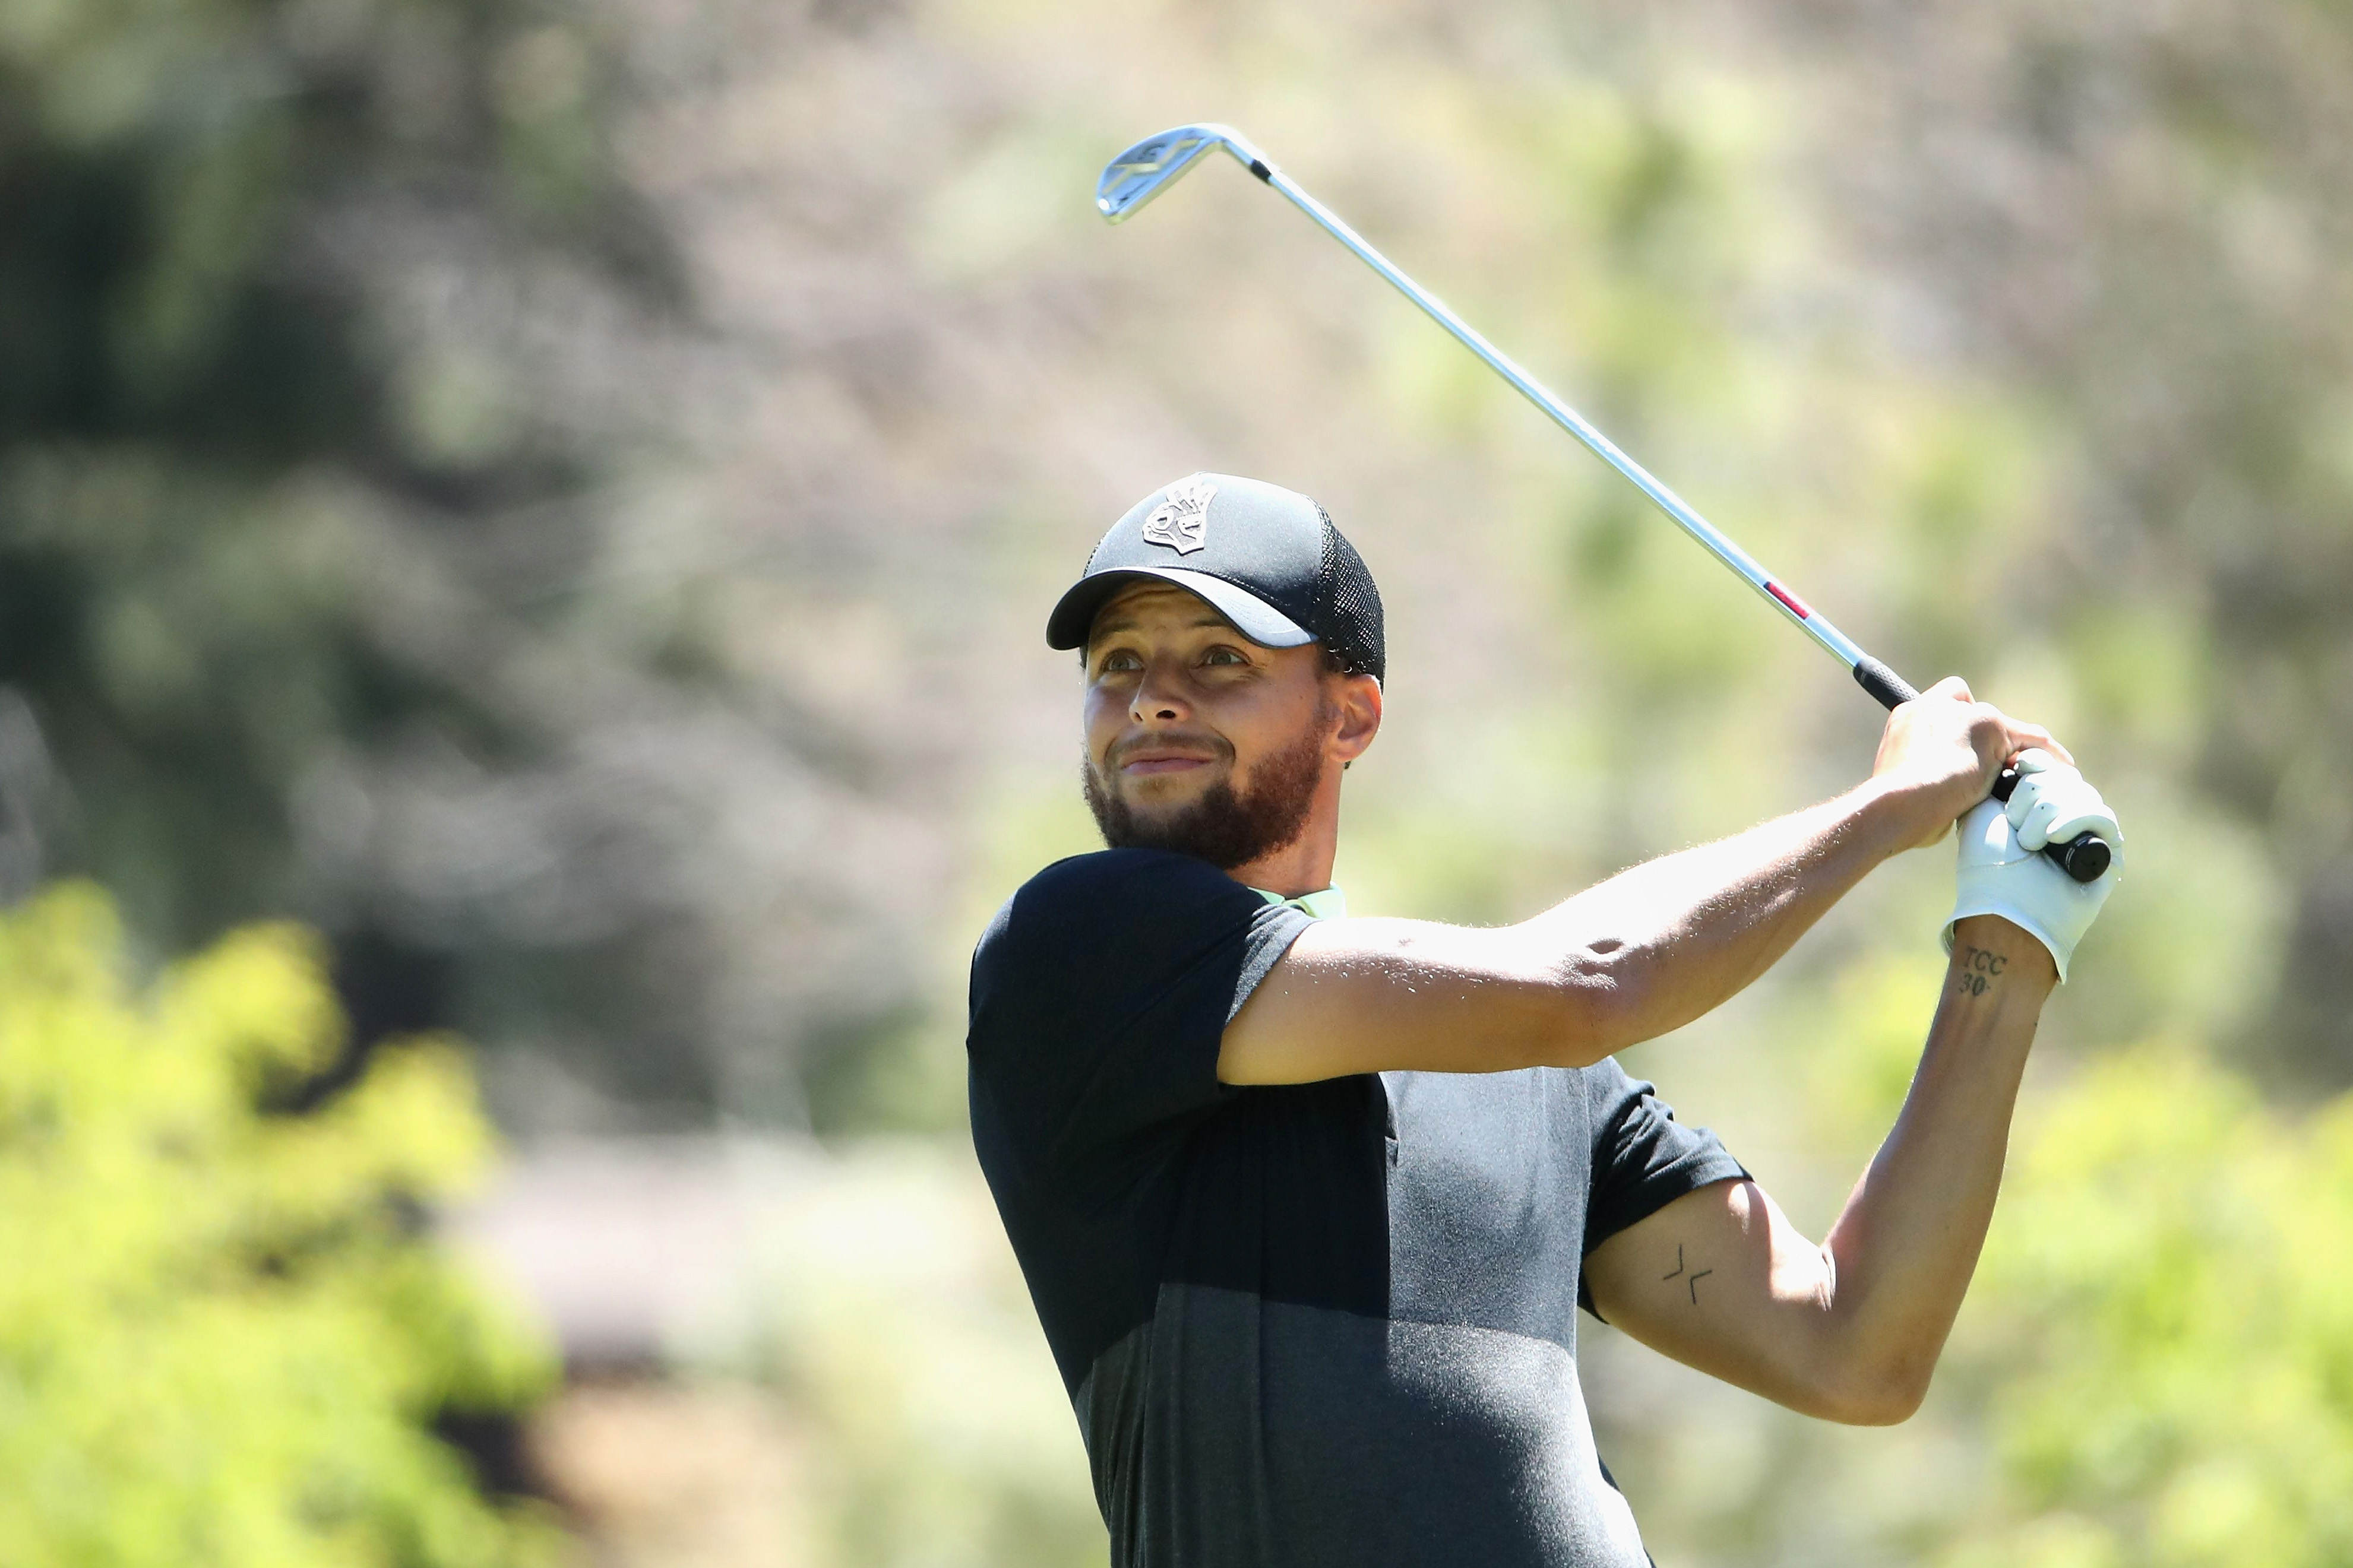 How to watch American Century Championship celebrity golf tournament Free live stream, dates, time, TV, channel, participants including Steph Curry, Patrick Mahomes